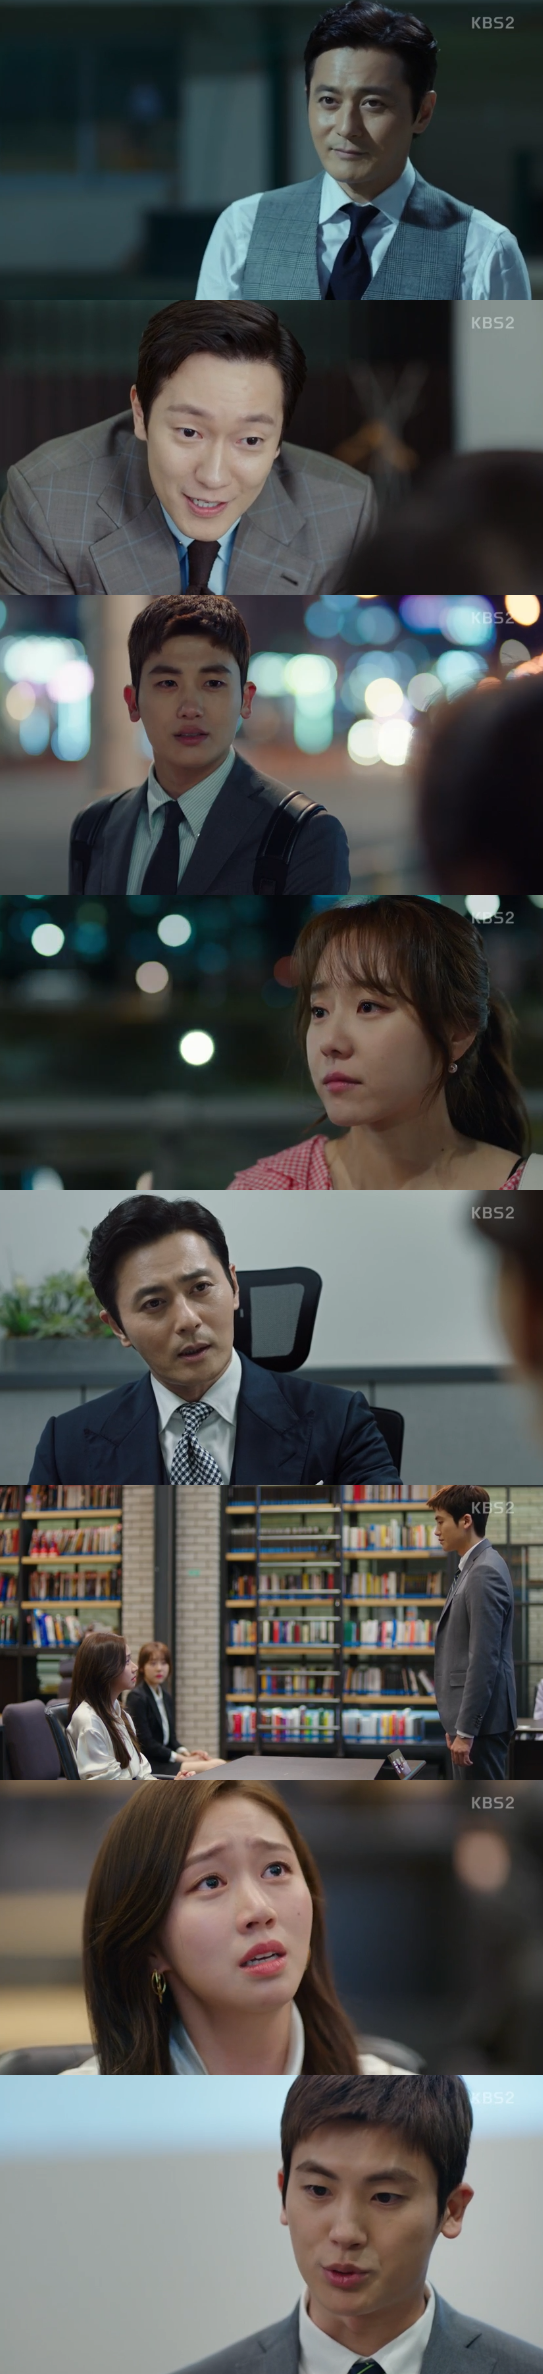 Suits Park Hyung-sik loses Moot courtOn KBS2s drama Suits, which was broadcast on the afternoon of the 10th, Ko Yeon-woo (Park Hyung-sik) was shown to be in the moot court.Ko Yeon-woo was embarrassed when lawyer Seo Ki-woong (Lee Tae-sun), who promised an agreement ahead of the Moot court, broke his promise and proceeded with the trial.In the trial, he set the stage for a reversal, but Miniforce rebuked Ko Yeon-woo, who was hit by the back of his head the next day.The case of Yumi Pharmaceuticals has become increasingly difficult, and the financial statements were Jessie as evidence that Yumi Pharmaceutical was virtually bankrupt before the development of the new drug based on the plaintiffs lawyers manipulation of the clinical trial results.Miniforce Seok (Jang Dong-gun) met David Kim (Son Seok-gu) and offered a recording file on the relationship between Noxy Chemical and David Kim obtained through Jay (Choi Yoo-hwa).David blushed and said, I can not use it in court because it is illegal wiretapping anyway, but Miniforce said, I have a anonymous informant in front of the door.Where dare the prey try to get on the ring? In the end, David signed a settlement signed by Miniforce Seok Jessie.Ko Yeon-woo, who watched this, played the file by asking, Was it really intended to be used in this file court? But the voice that flowed out was a Moot court recording file.I dont do that in court, Miniforce told the bewildered Ko Yeon-woo.Although the Noxy Chemical case was resolved, the Yumi Pharmaceutical case remained. Miniforce Seok and Ko Yeon-woo knew that Yumi Pharmaceuticals former director lied to protect Kim.Miniforce persuaded Kim to take responsibility for all cases and to deal with the company.Ko Yeon-woo invited Se-hee as a Moot court client; Miniforce advised, Take a man, not an incident.Ji-na Kim (Ko Sung-hee) met Sehee and asked, Are you Ko Yeon-woos girlfriend? And praised Both of you are well suited. There was a strange atmosphere between the two.Sehee, who went to Moot court, took out the rabbit story and embarrassed Ji-na Kim.Previously, Ji-na Kim told her story about a rabbit living on the moon.Ji-na Kim, who felt betrayed, received a newspaper of Ko Yeon-woo and brought his feelings to the Character and shed tears.Ko Yeon-woo, who was pushing Ji-na Kim, was embarrassed by tears and could not bring out the decisive testimony, and the Moot court ended with a loss of Ko Yeon-woo.On the other hand, KBS2 Suits is broadcast every Wednesday and Thursday at 10 pm.Photo KBS2 broadcast screen capture